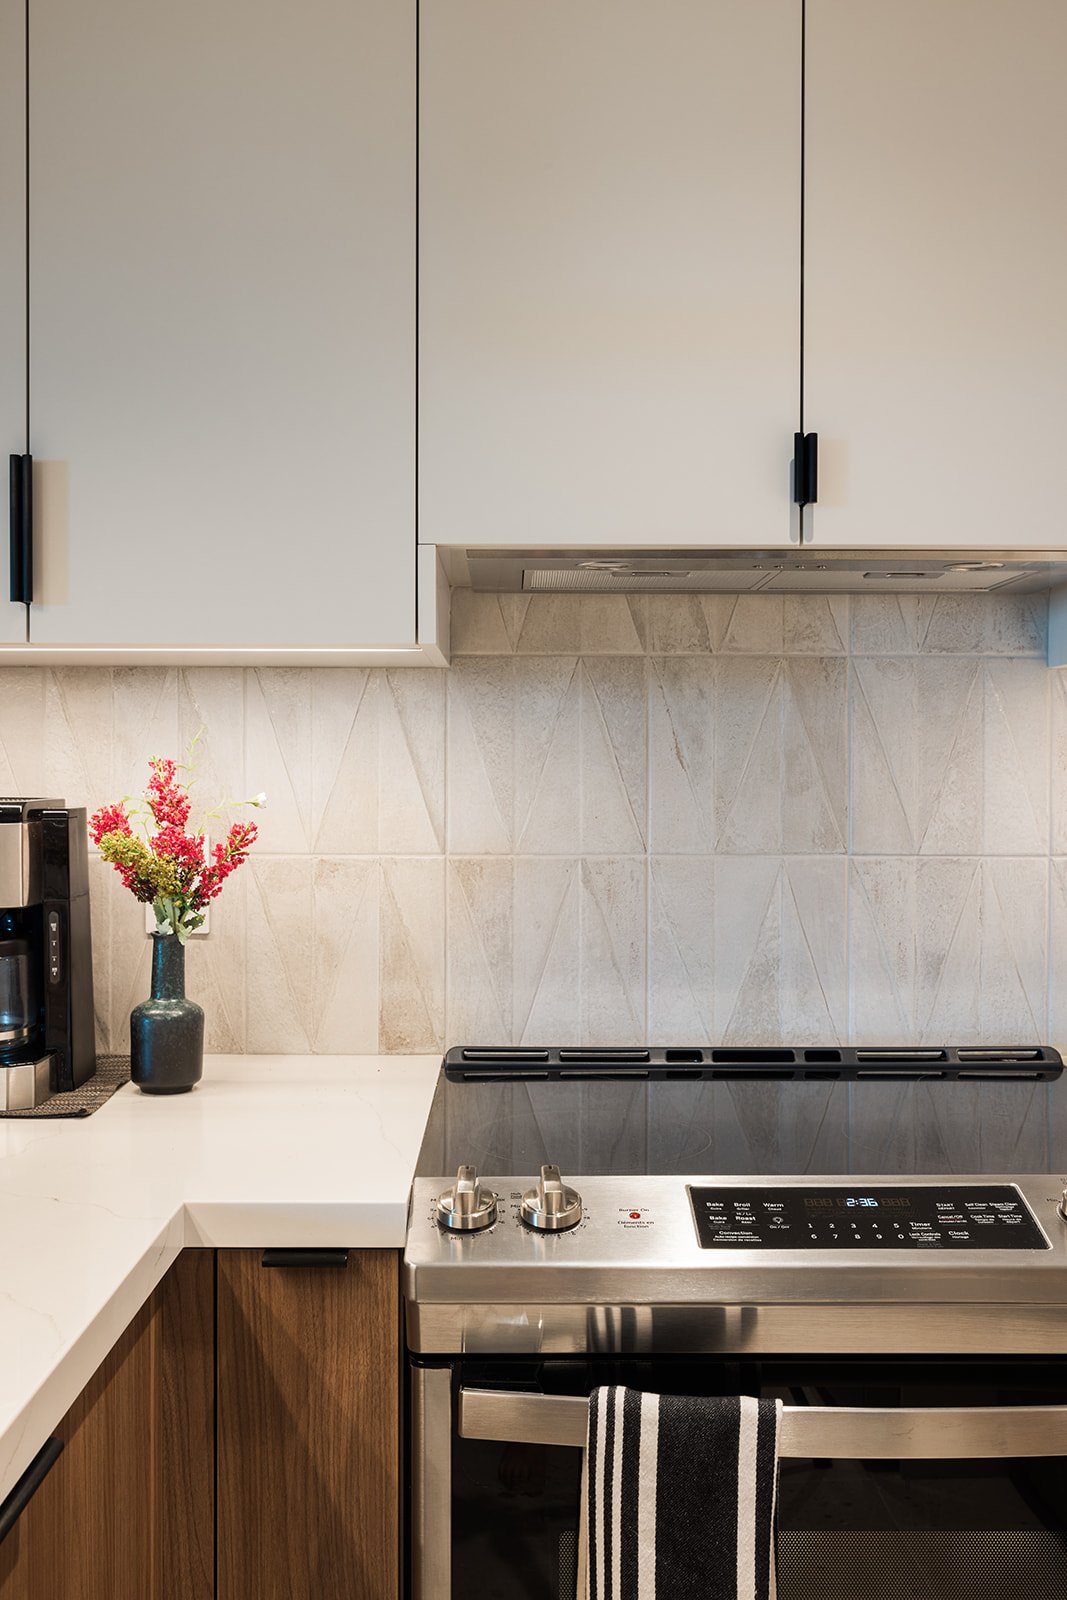 Mosaic beige backsplash behind oven and cabinets in GTA condo kitchen renovation